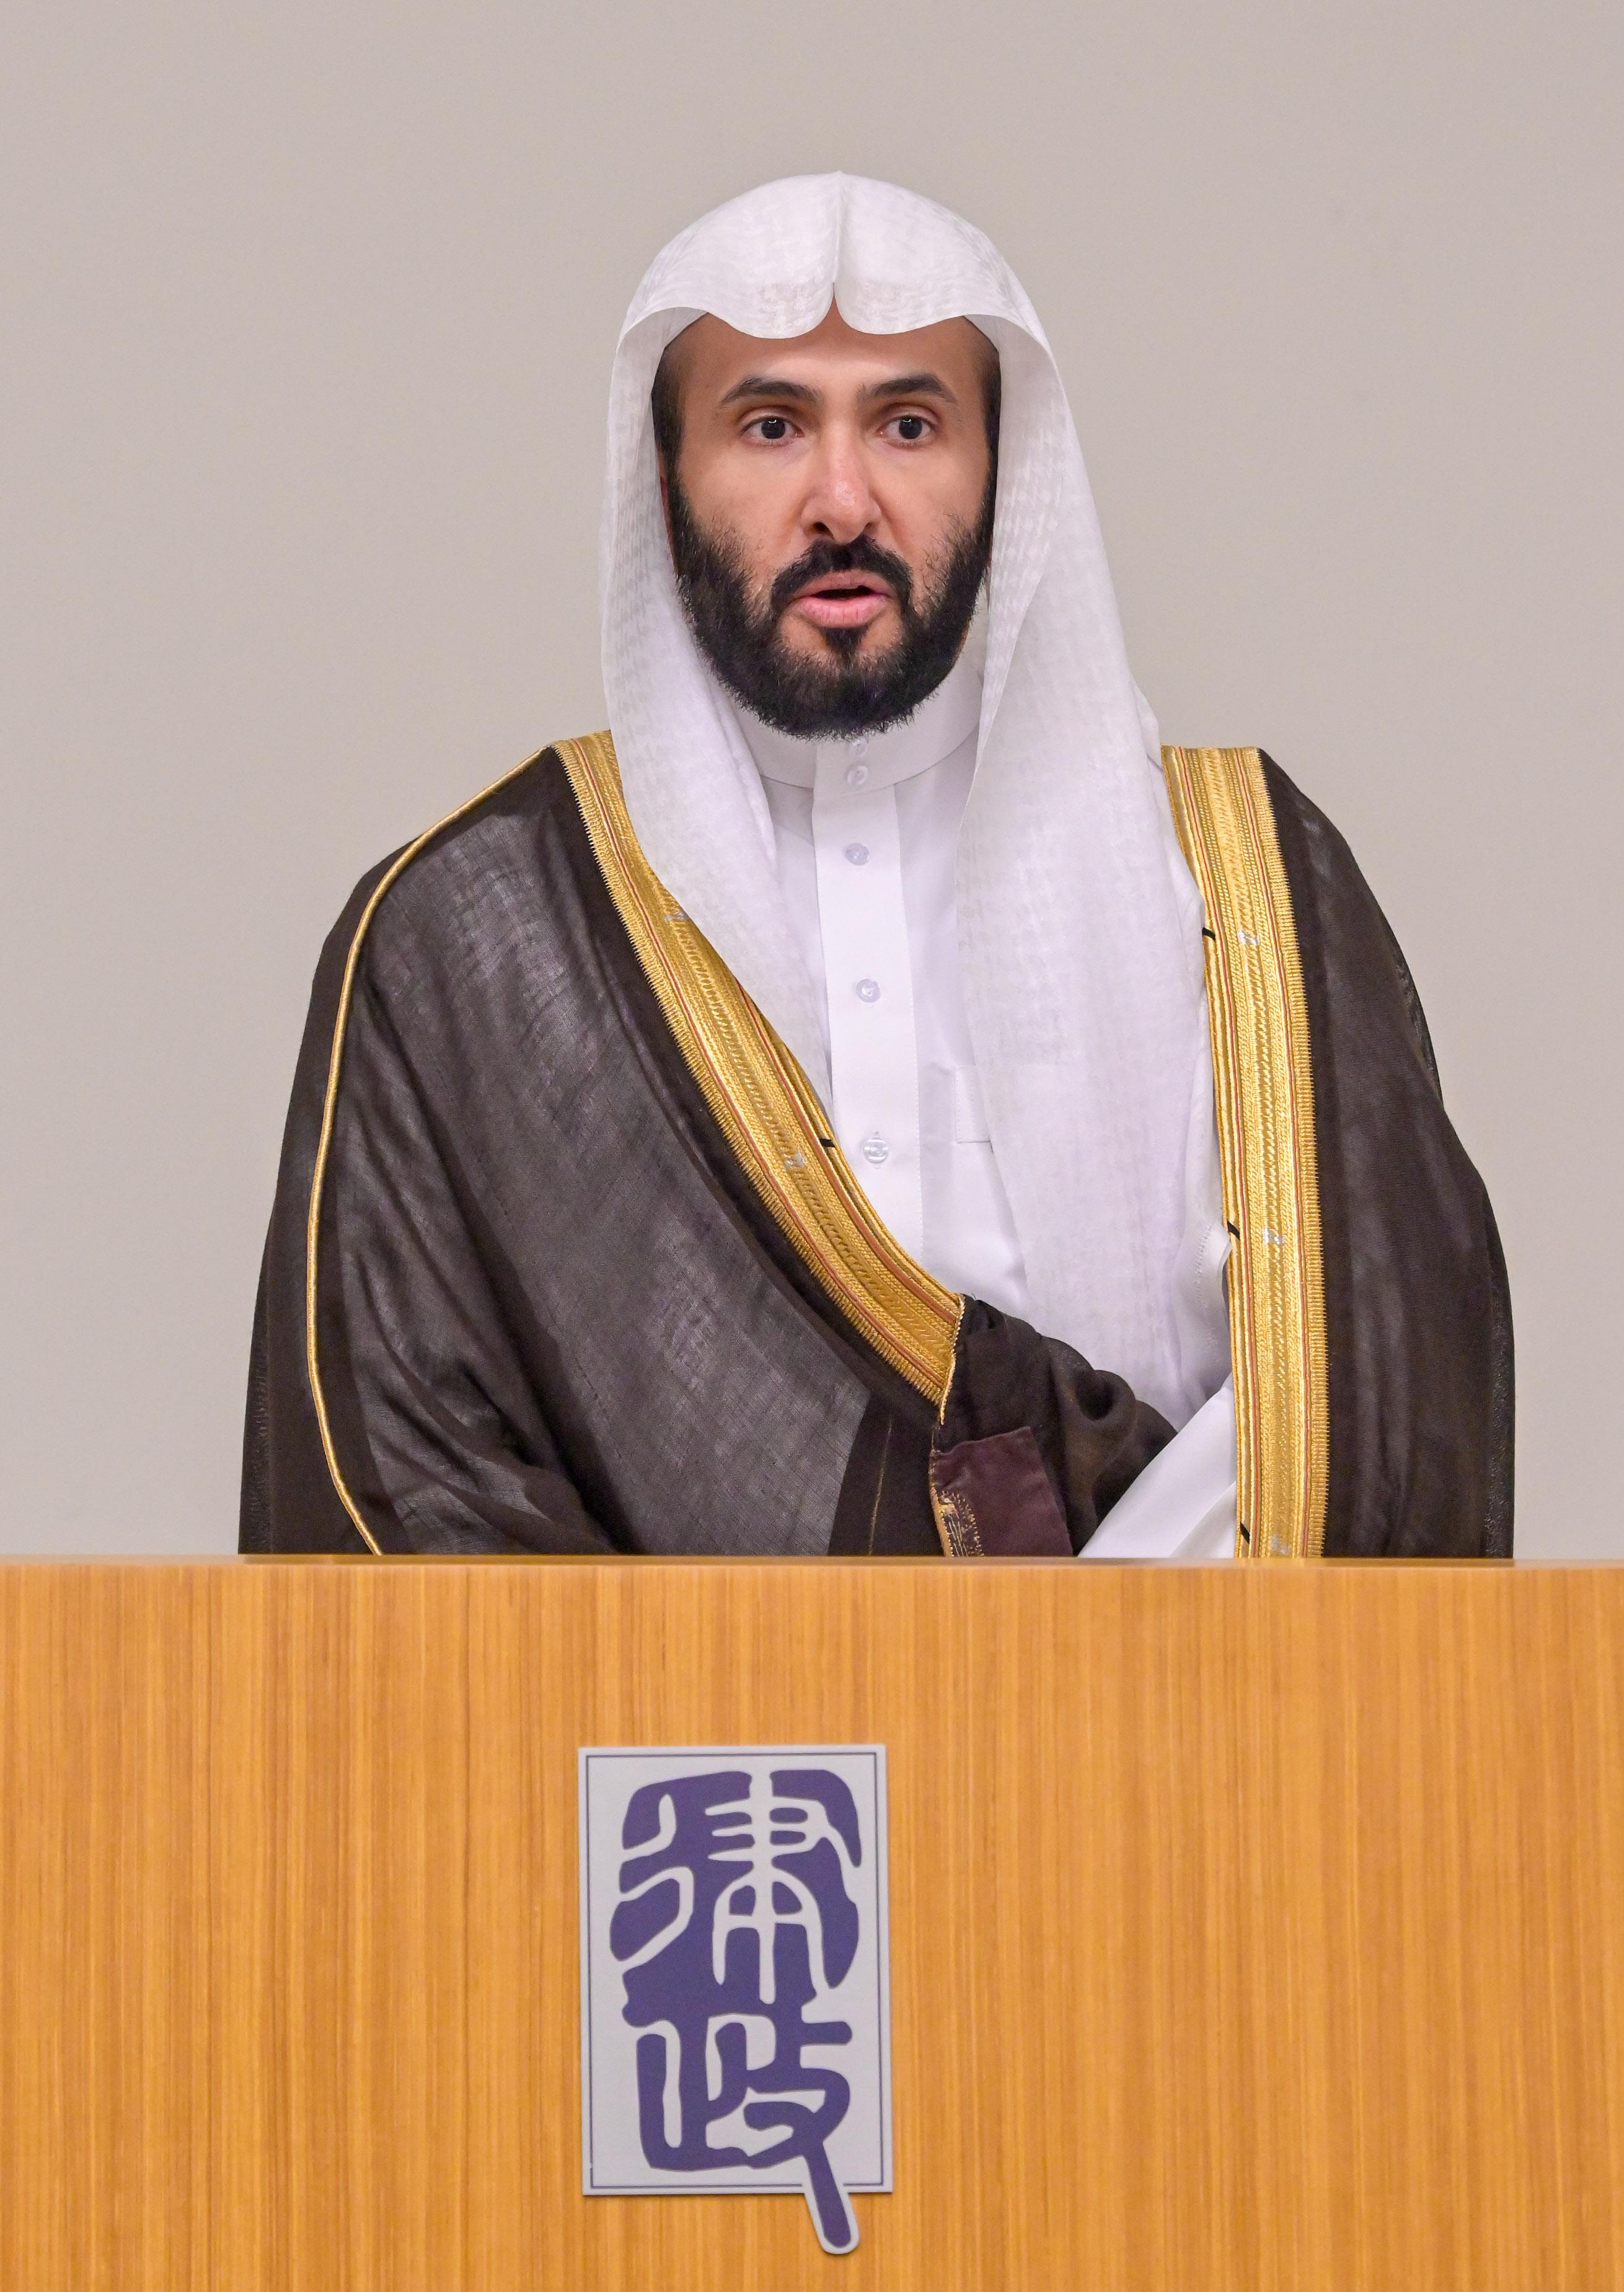 The Department of Justice of the Hong Kong Special Administrative Region and the Ministry of Justice of the Kingdom of Saudi Arabia signed a Memorandum of Understanding of Cooperation today (April 22) to strengthen their co-operation on issues relating to dispute avoidance and resolution. Photo shows the Minister of Justice of the Kingdom of Saudi Arabia, Dr Waleed Mohammed Alsmani, delivering his speech at the signing ceremony.